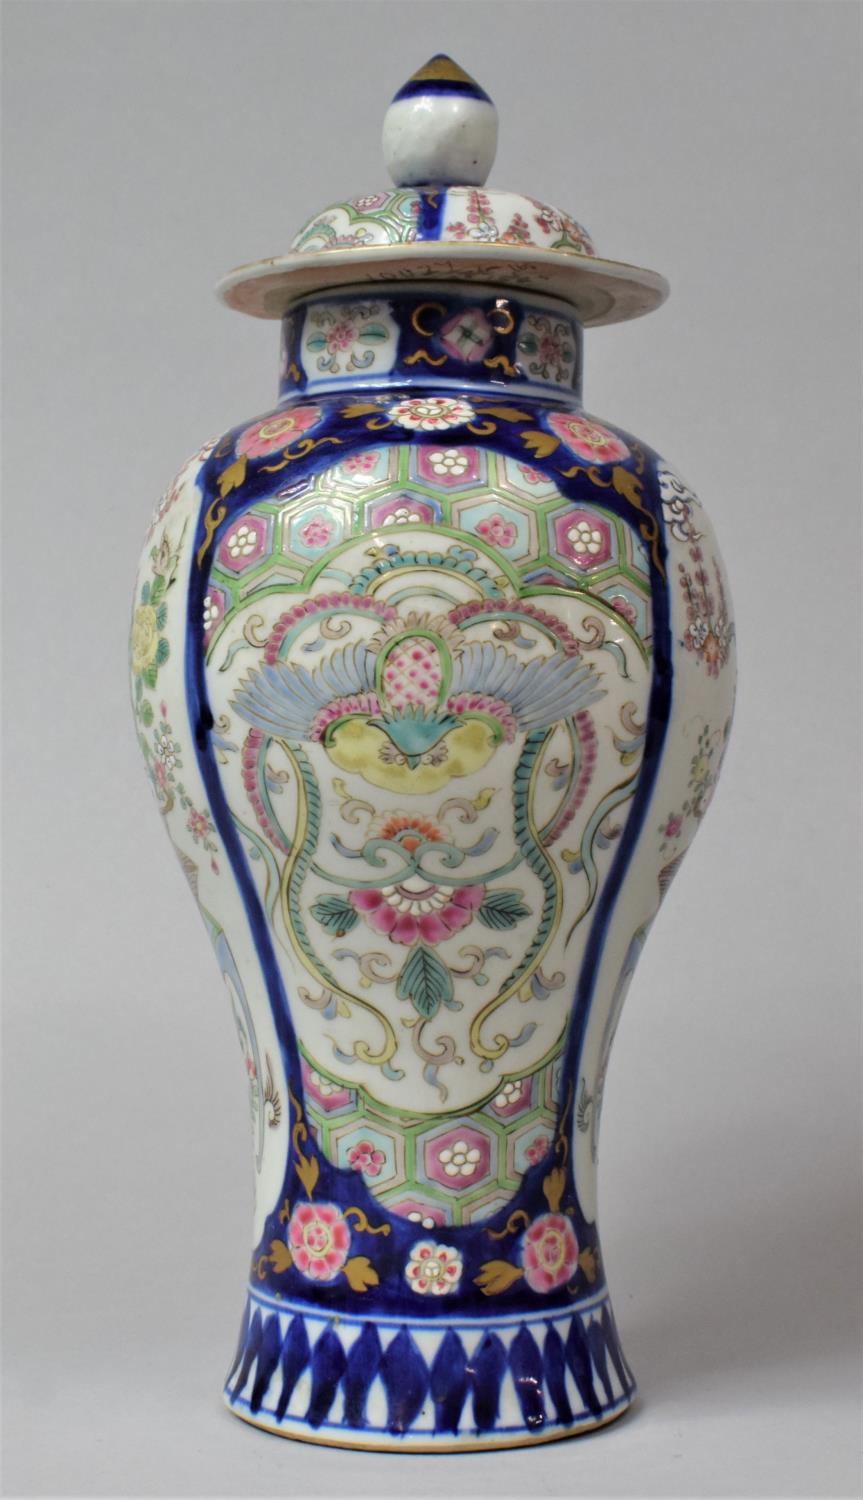 A Late 19th/Early 20th Century Chinese Lidded Vase of Balster Form Decorated Alternating Panels - Image 4 of 6